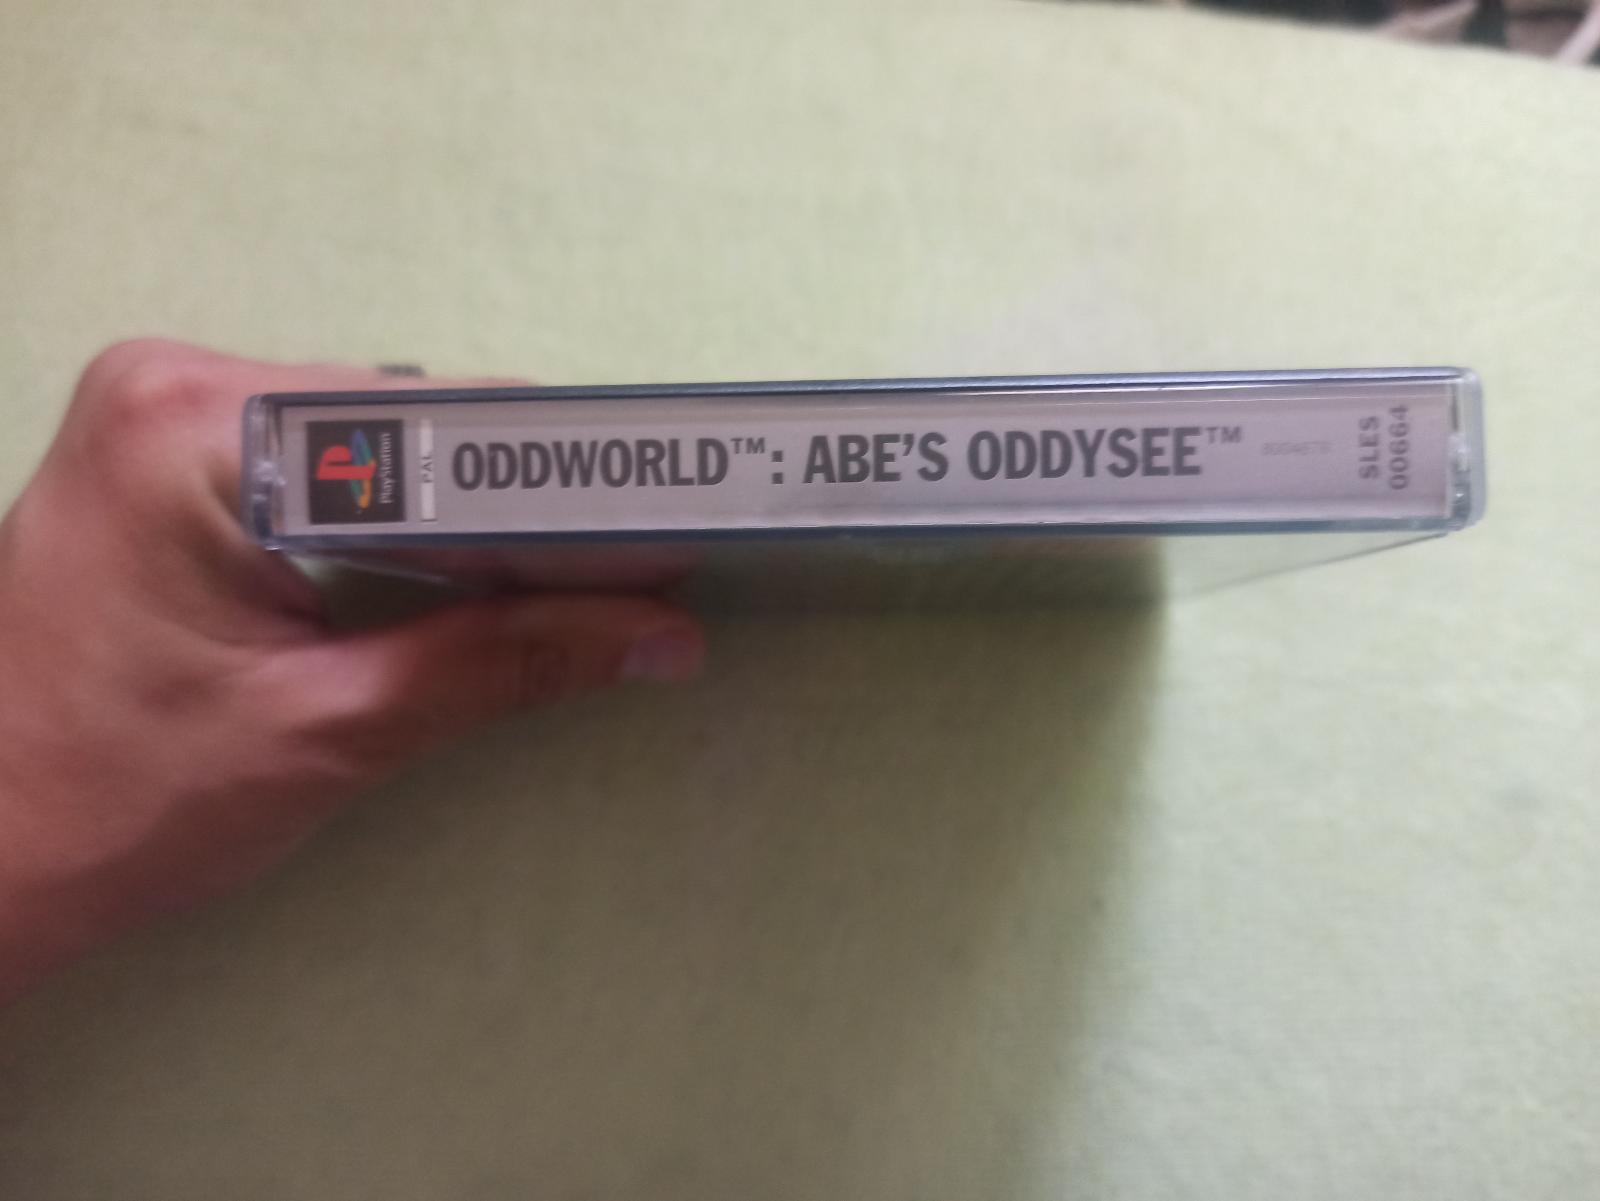 PS1 Oddworld Abes Oddysee - Hry